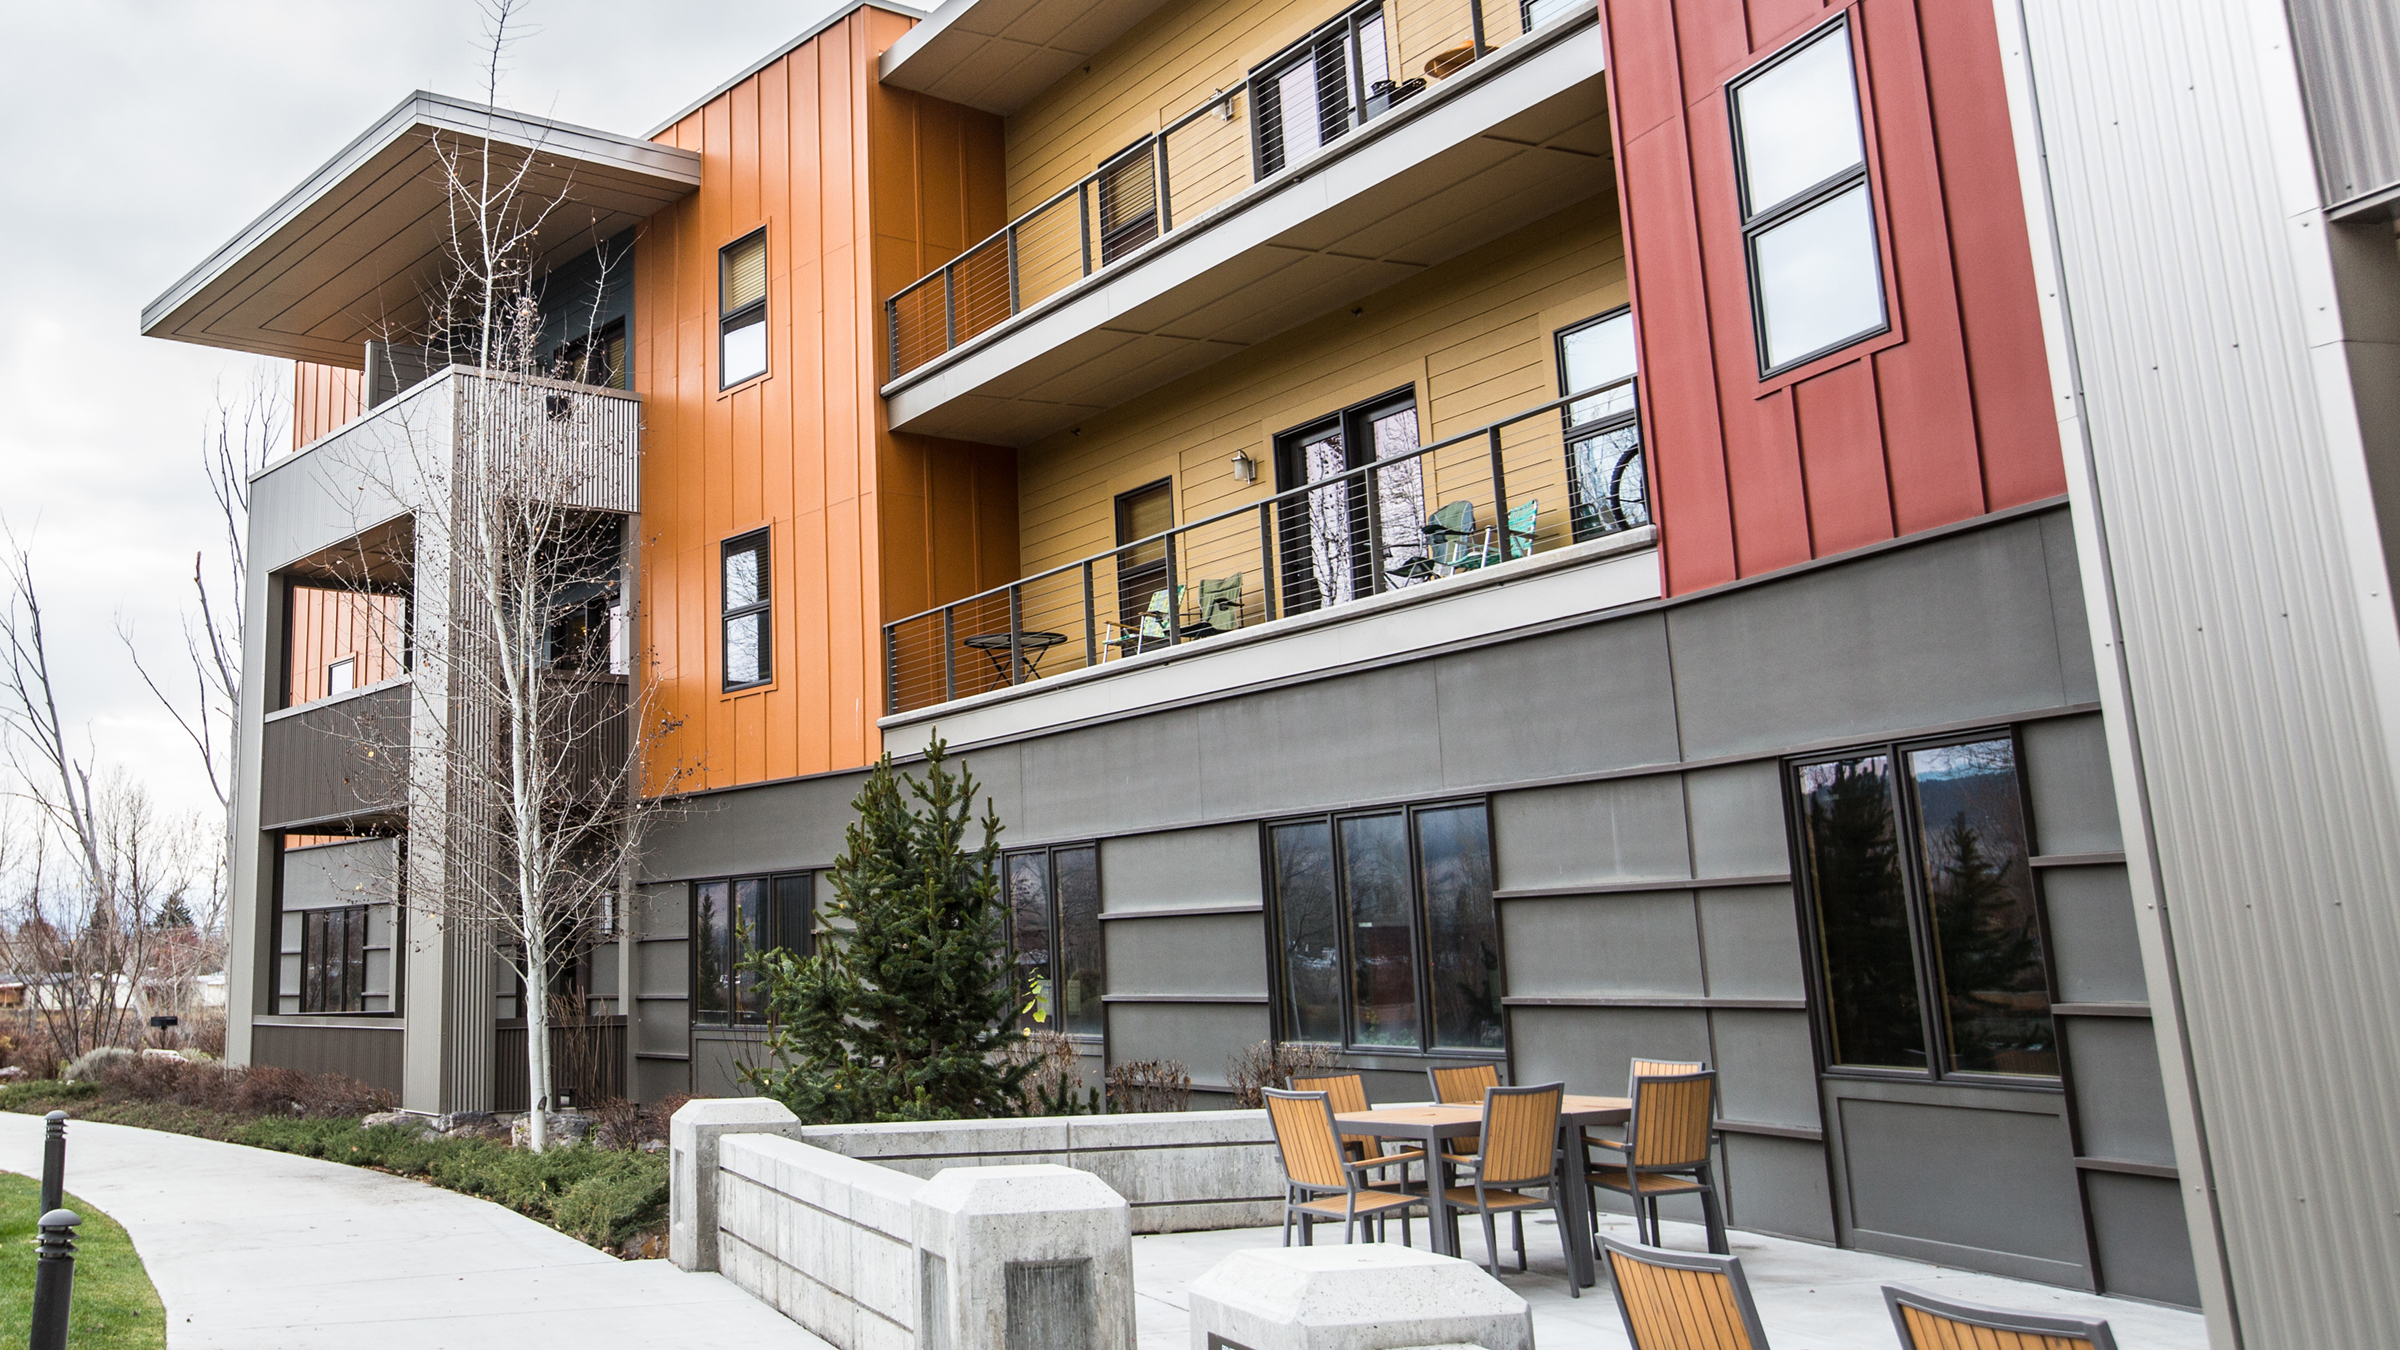 Solstice Apartments, an affordable housing community in Missoula, Mont.